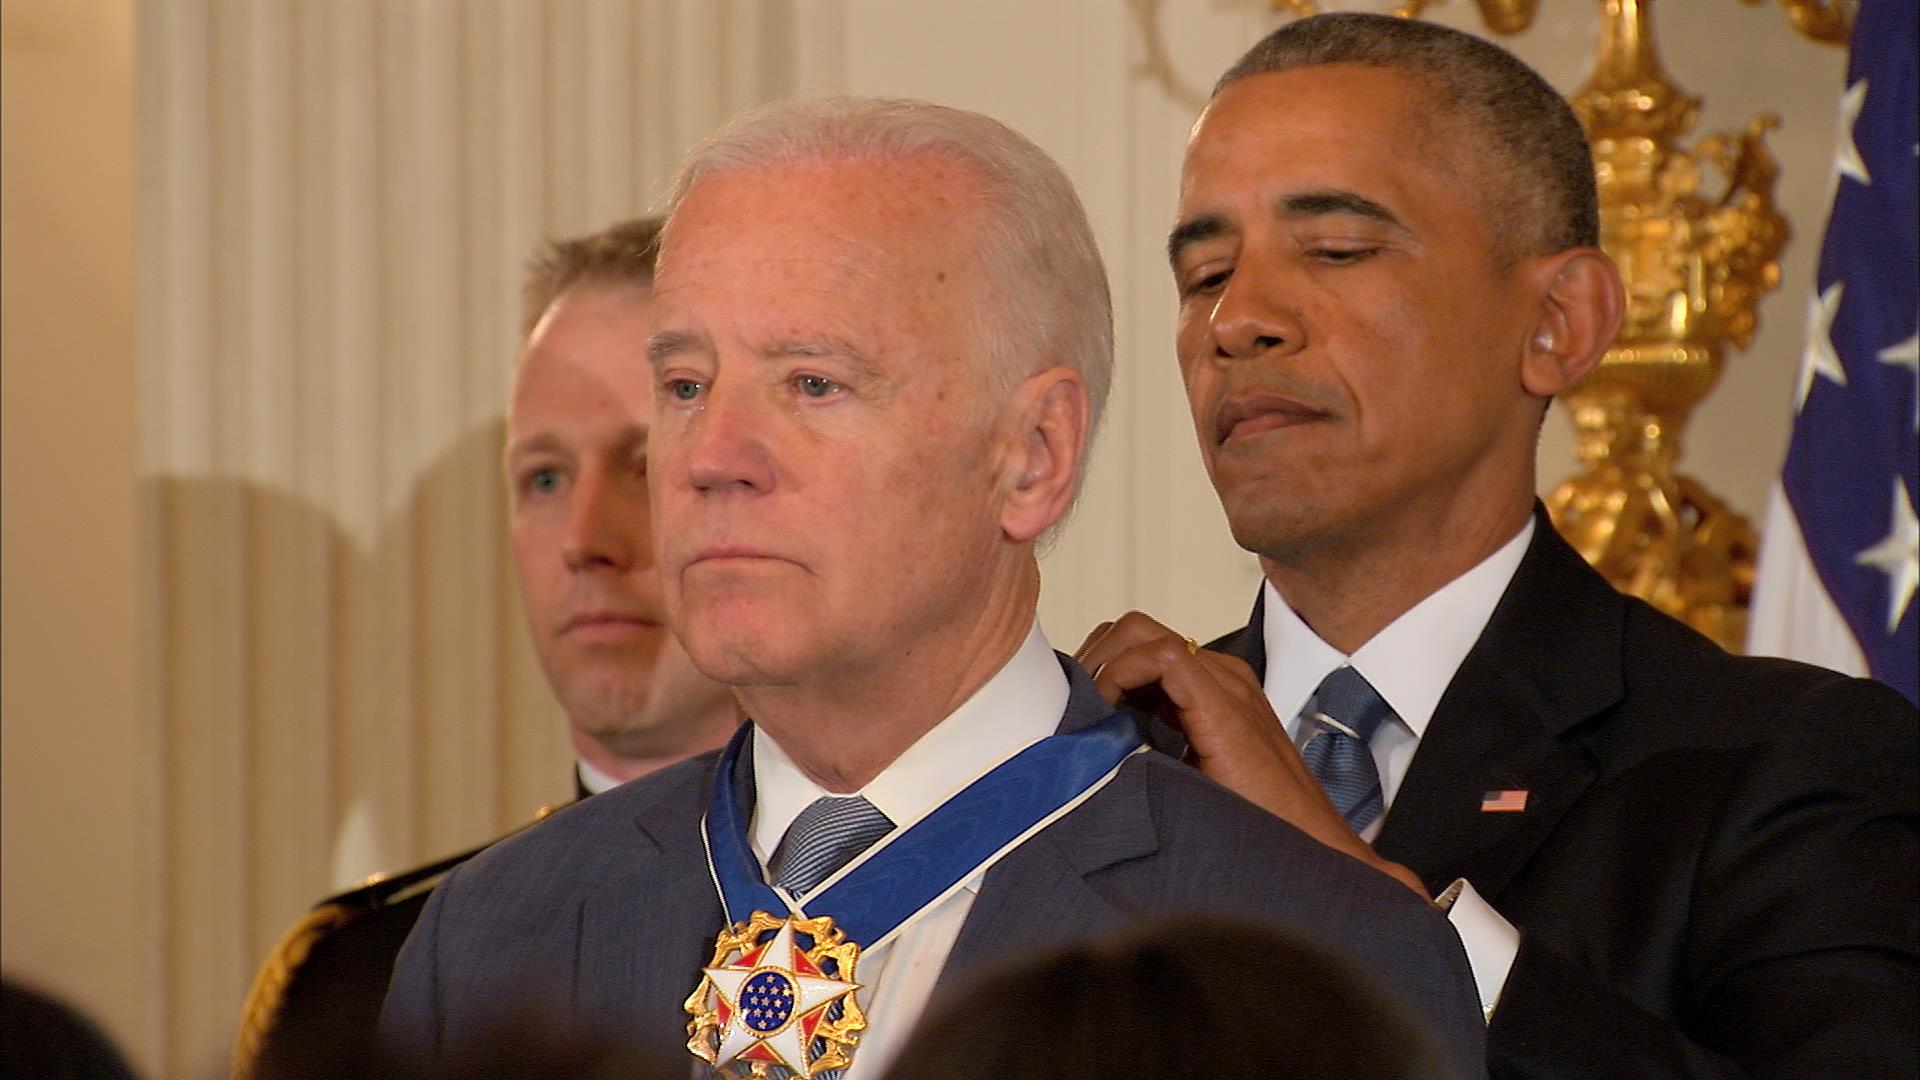 Barack Obama Honors Joe With Surprise of